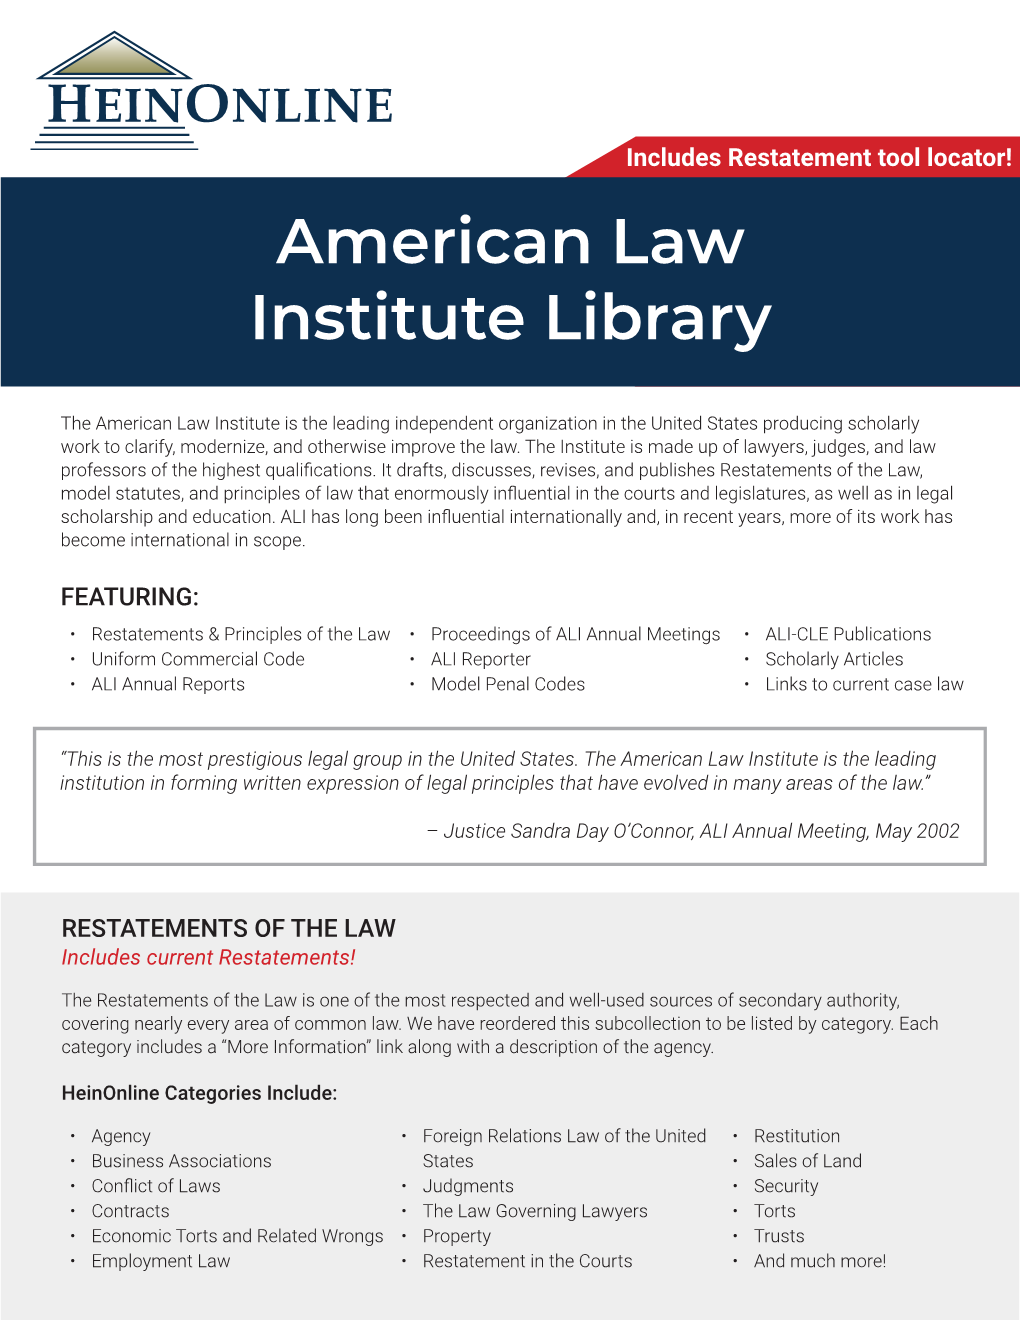 American Law Institute Library